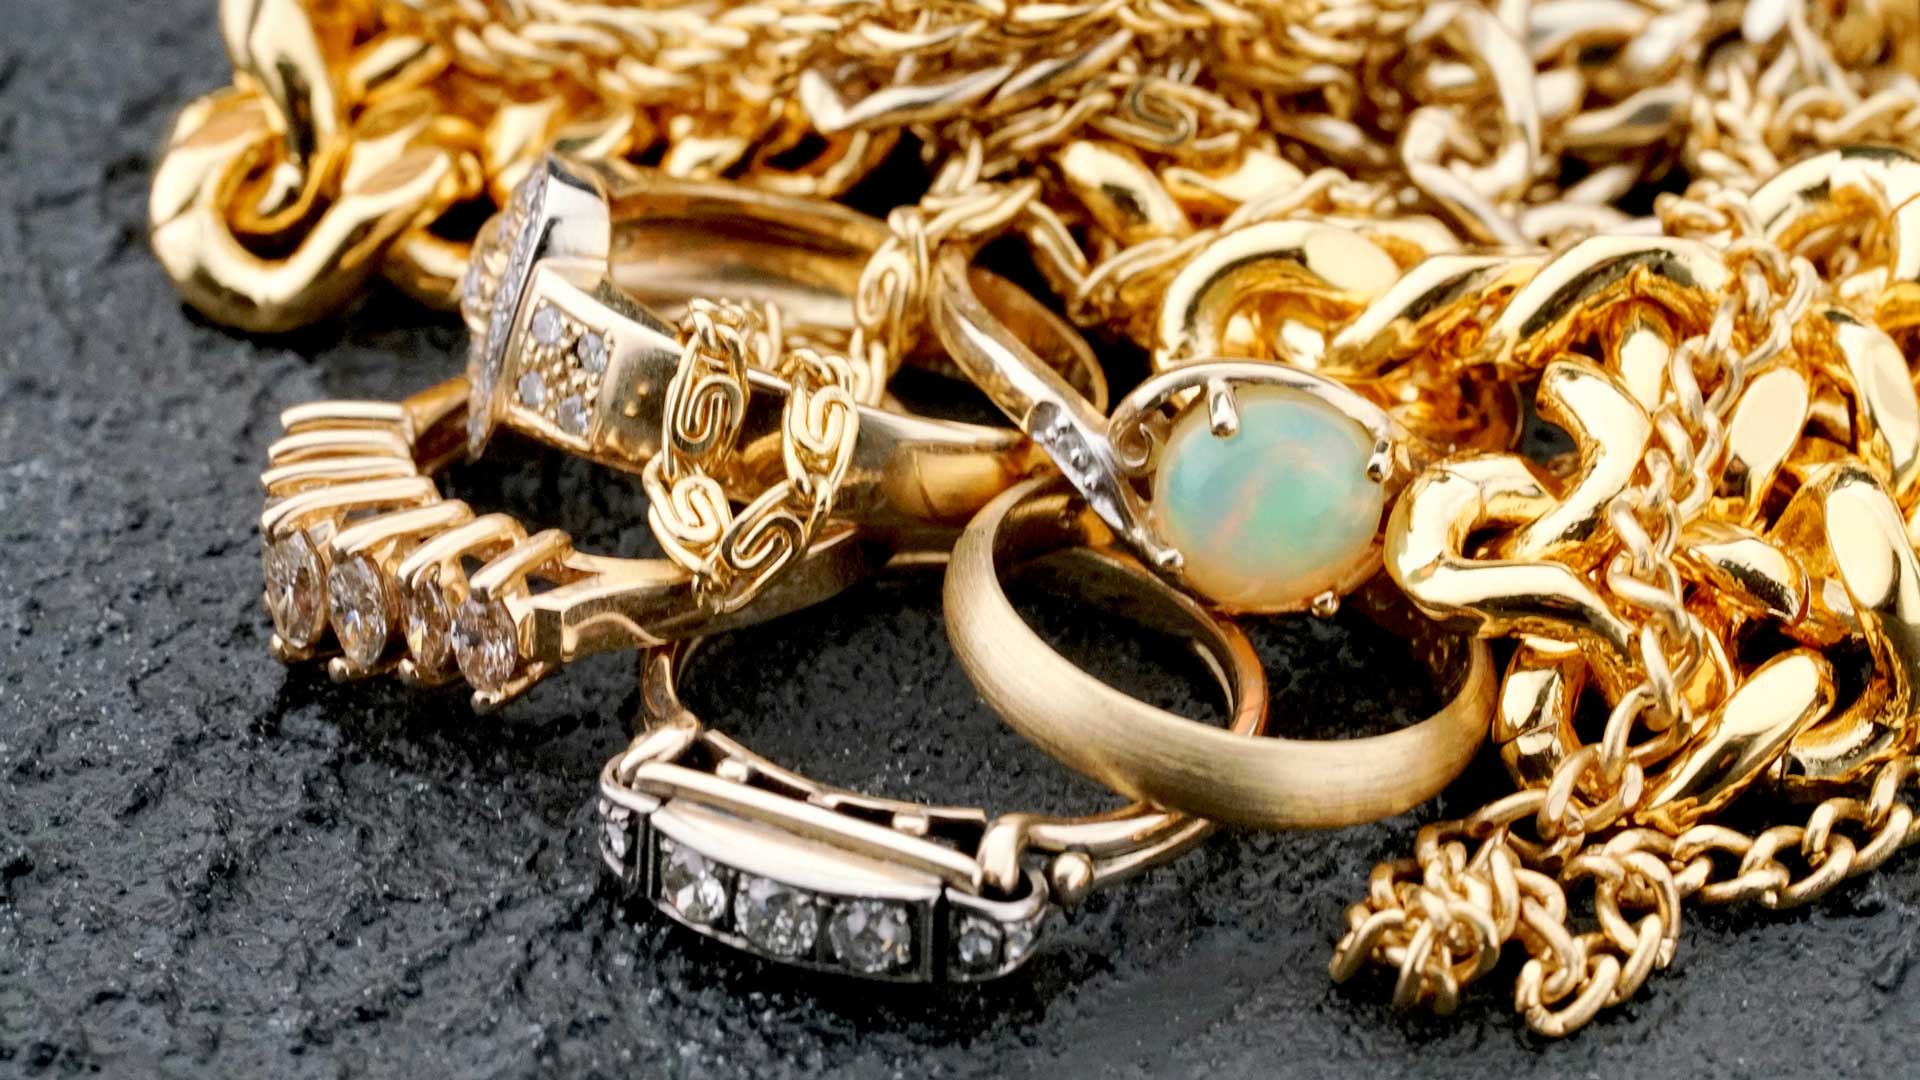 Cash for your gold jewellery